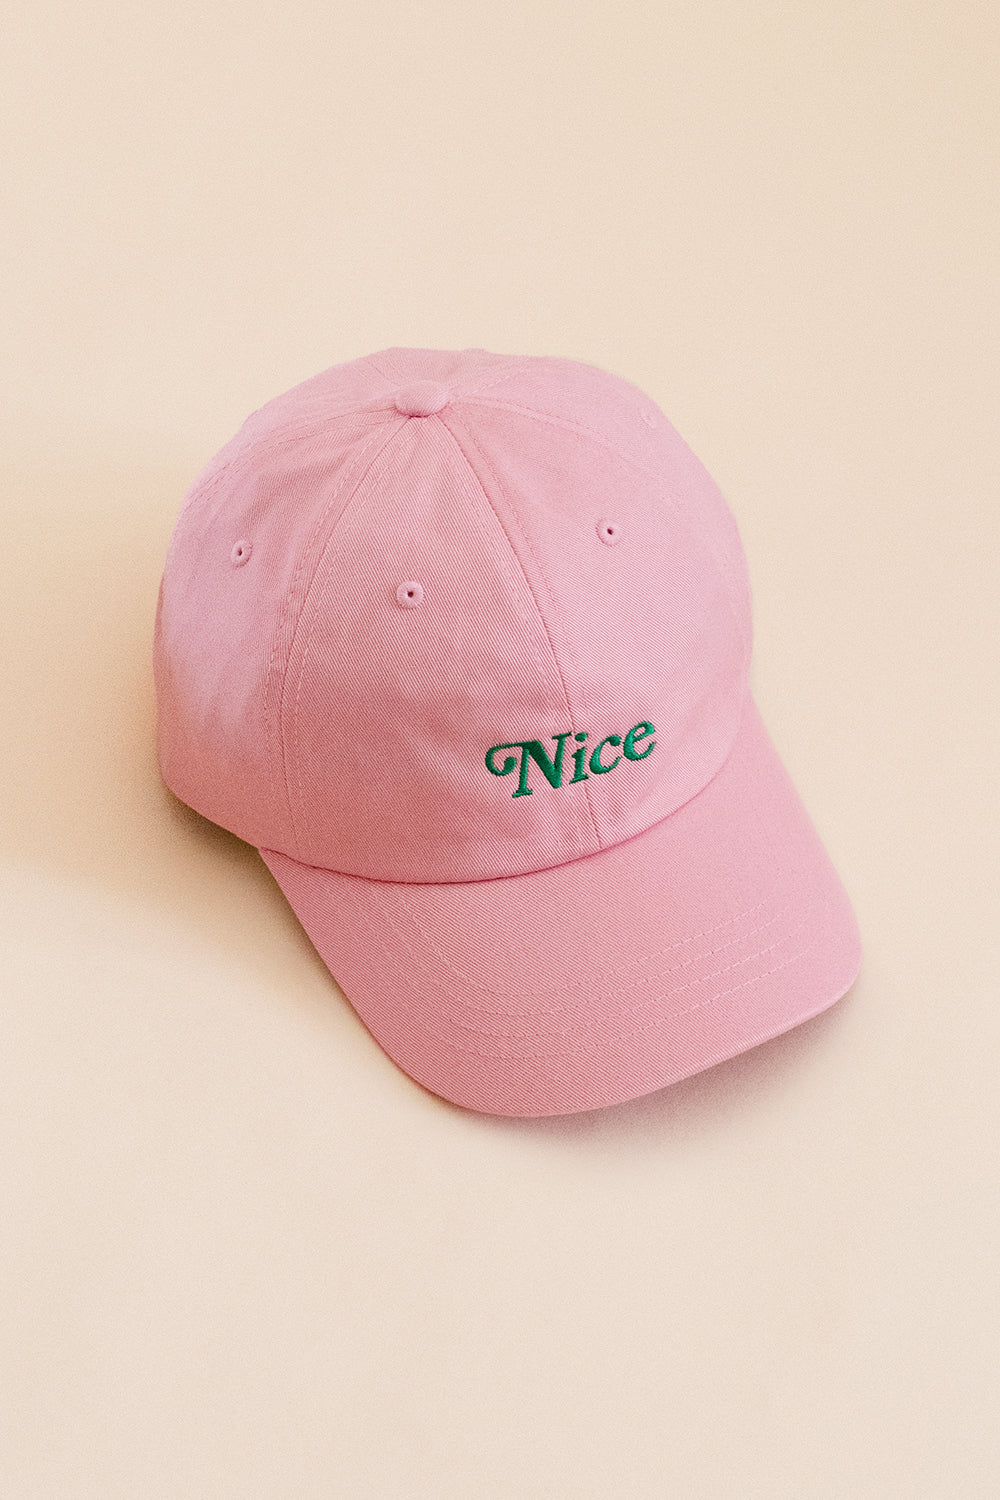 Classic Pink Hat